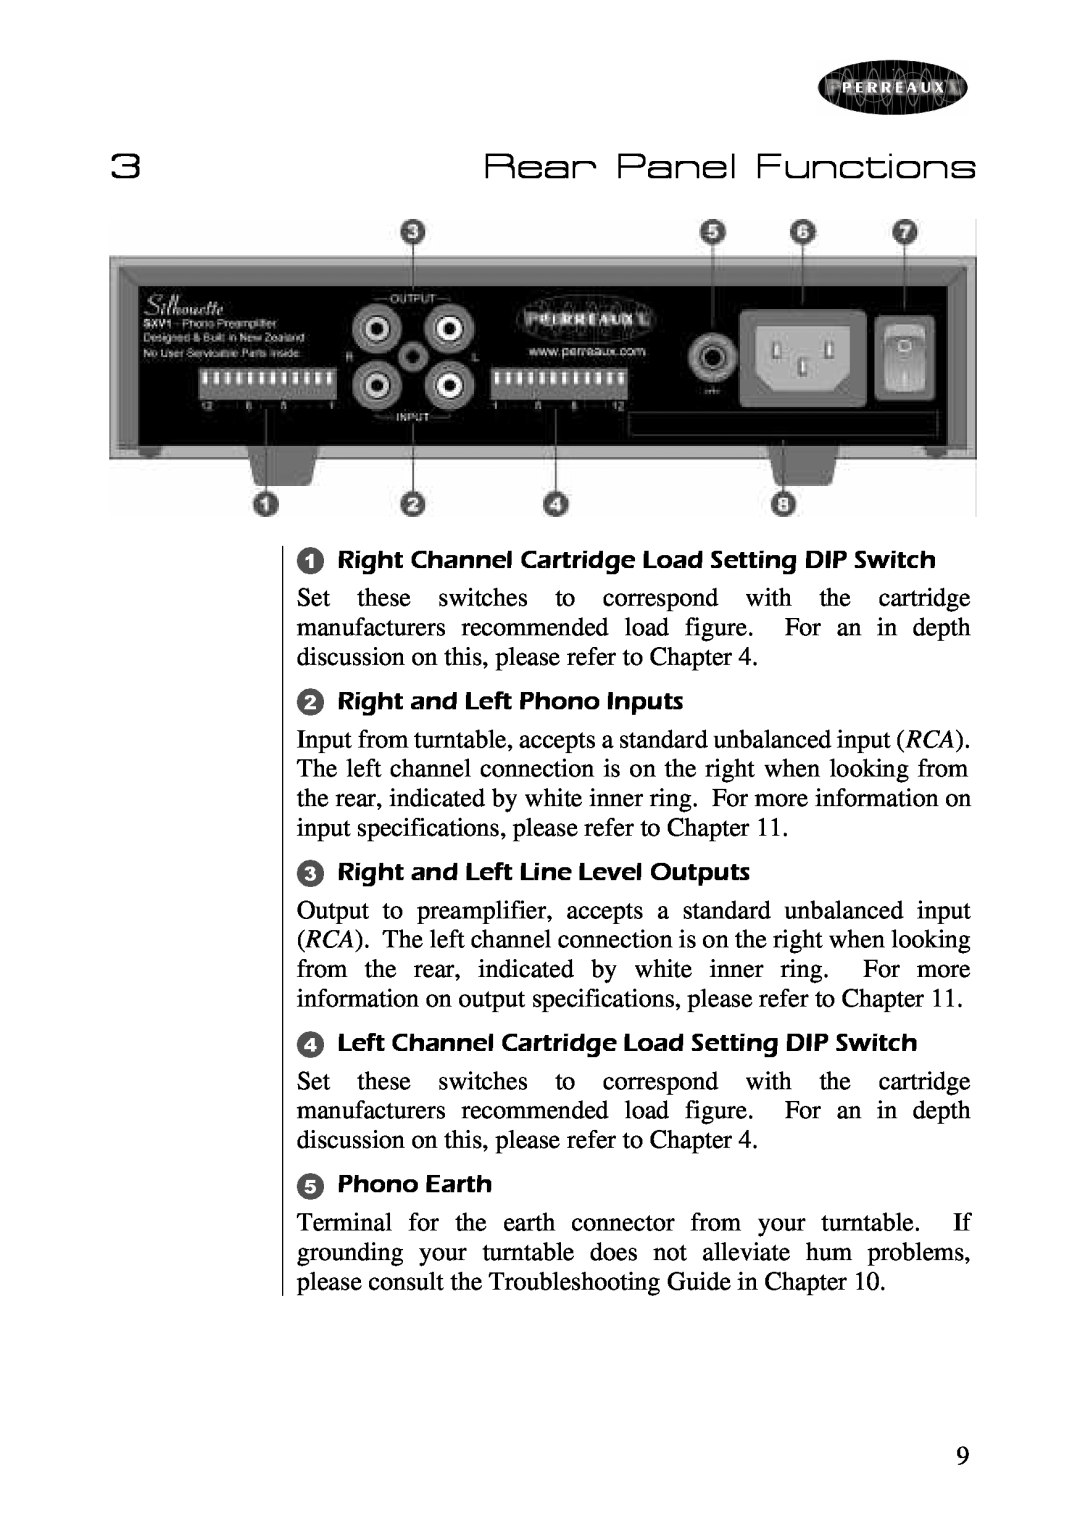 Perreaux SXV1 Rear Panel Functions, Right Channel Cartridge Load Setting DIP Switch, Right and Left Phono Inputs 